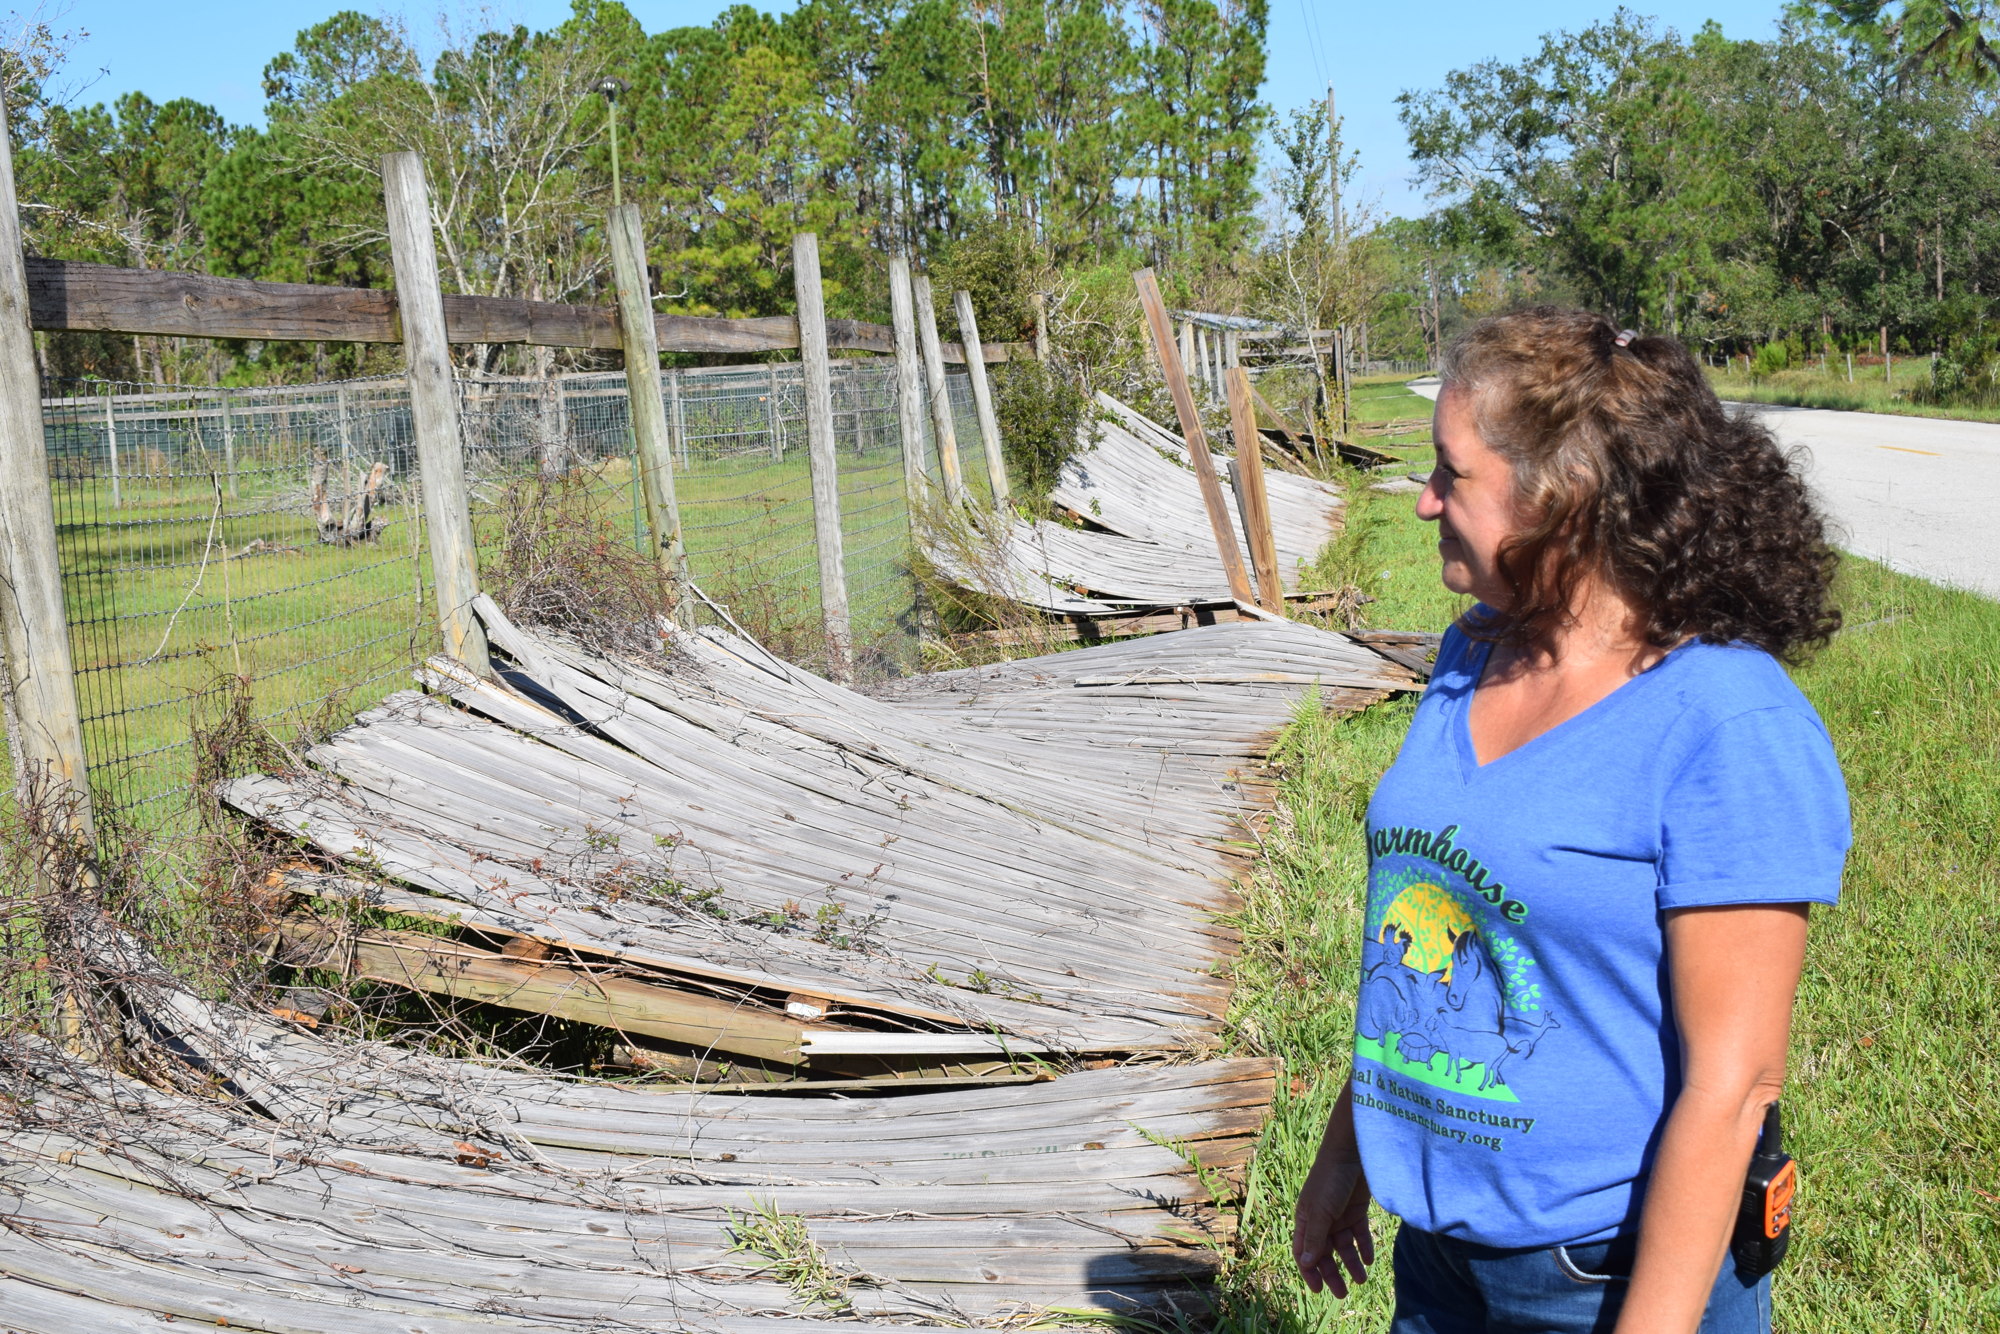 Lisa Burns looks over a length of the 8-foot fence that was destroyed. Photo by Jay Heater